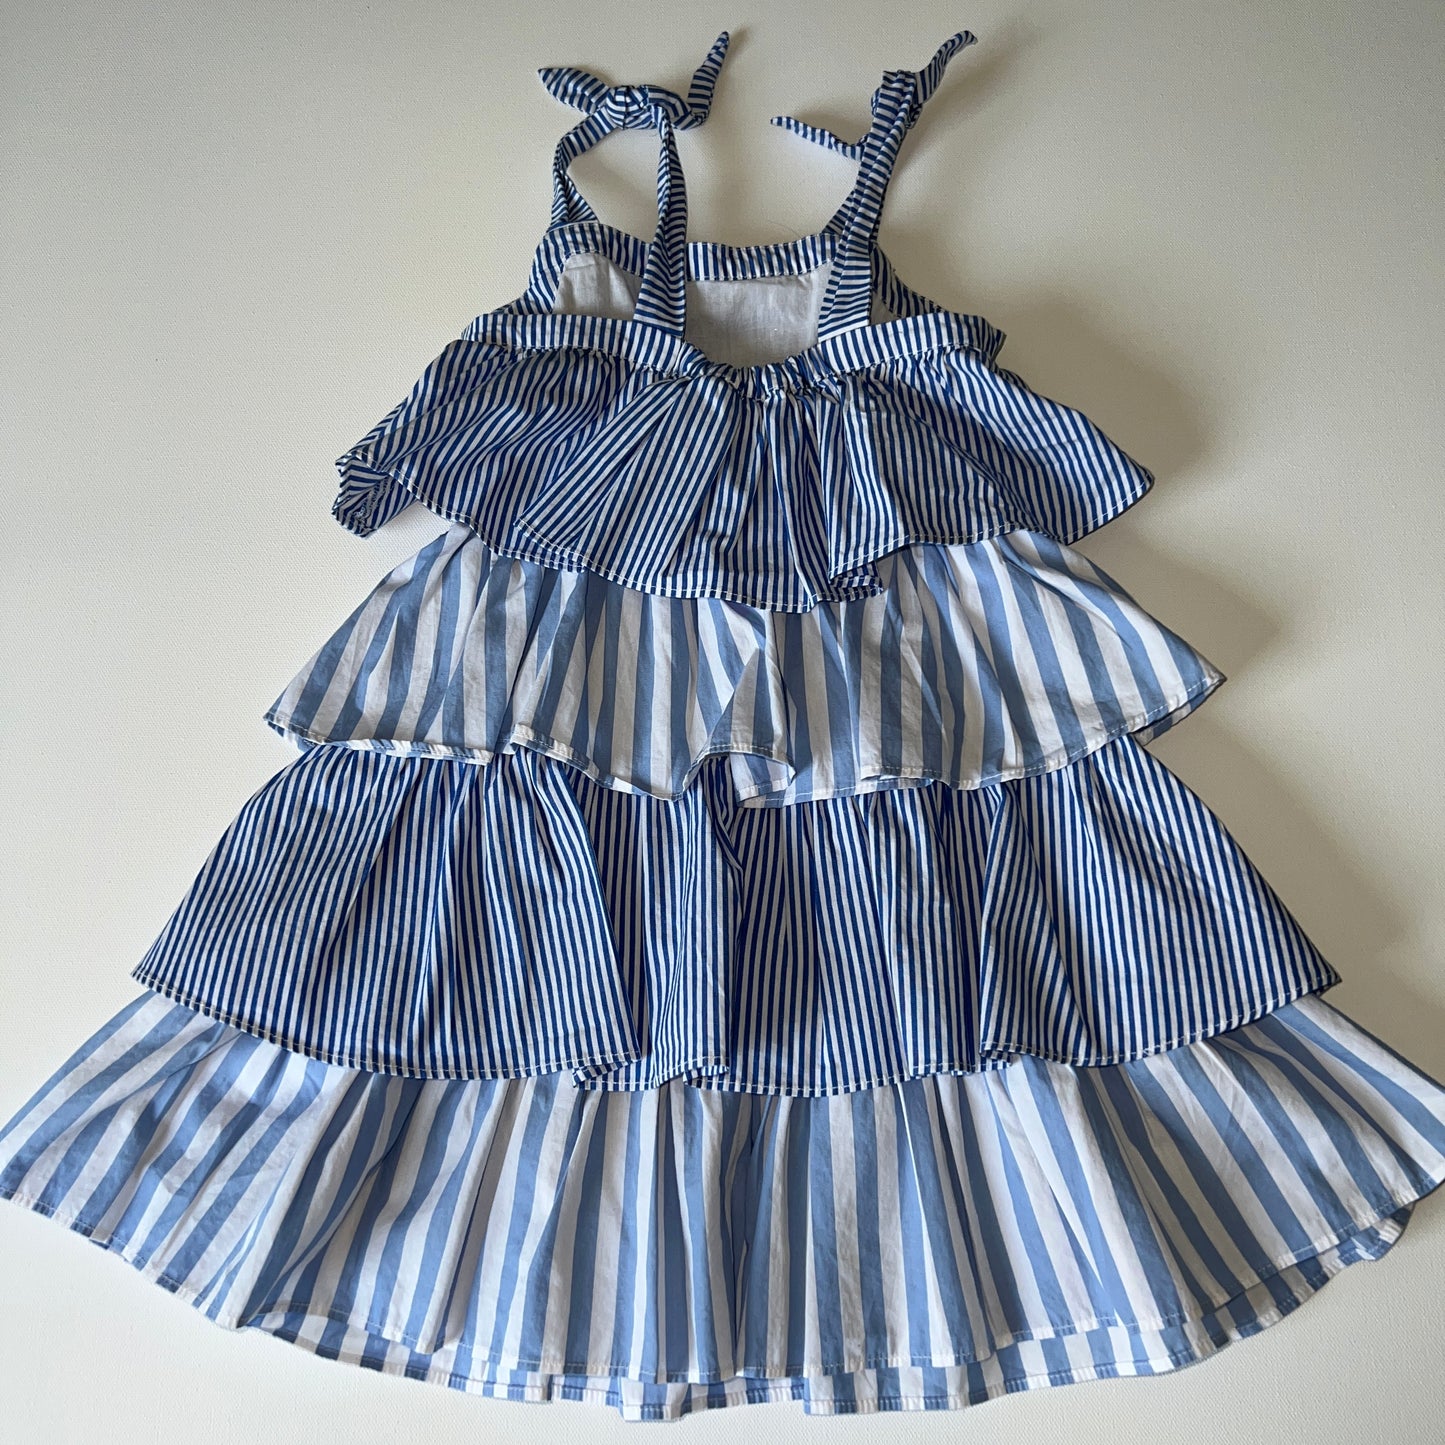 J.Crew Girls' tiered dress in mixed stripes